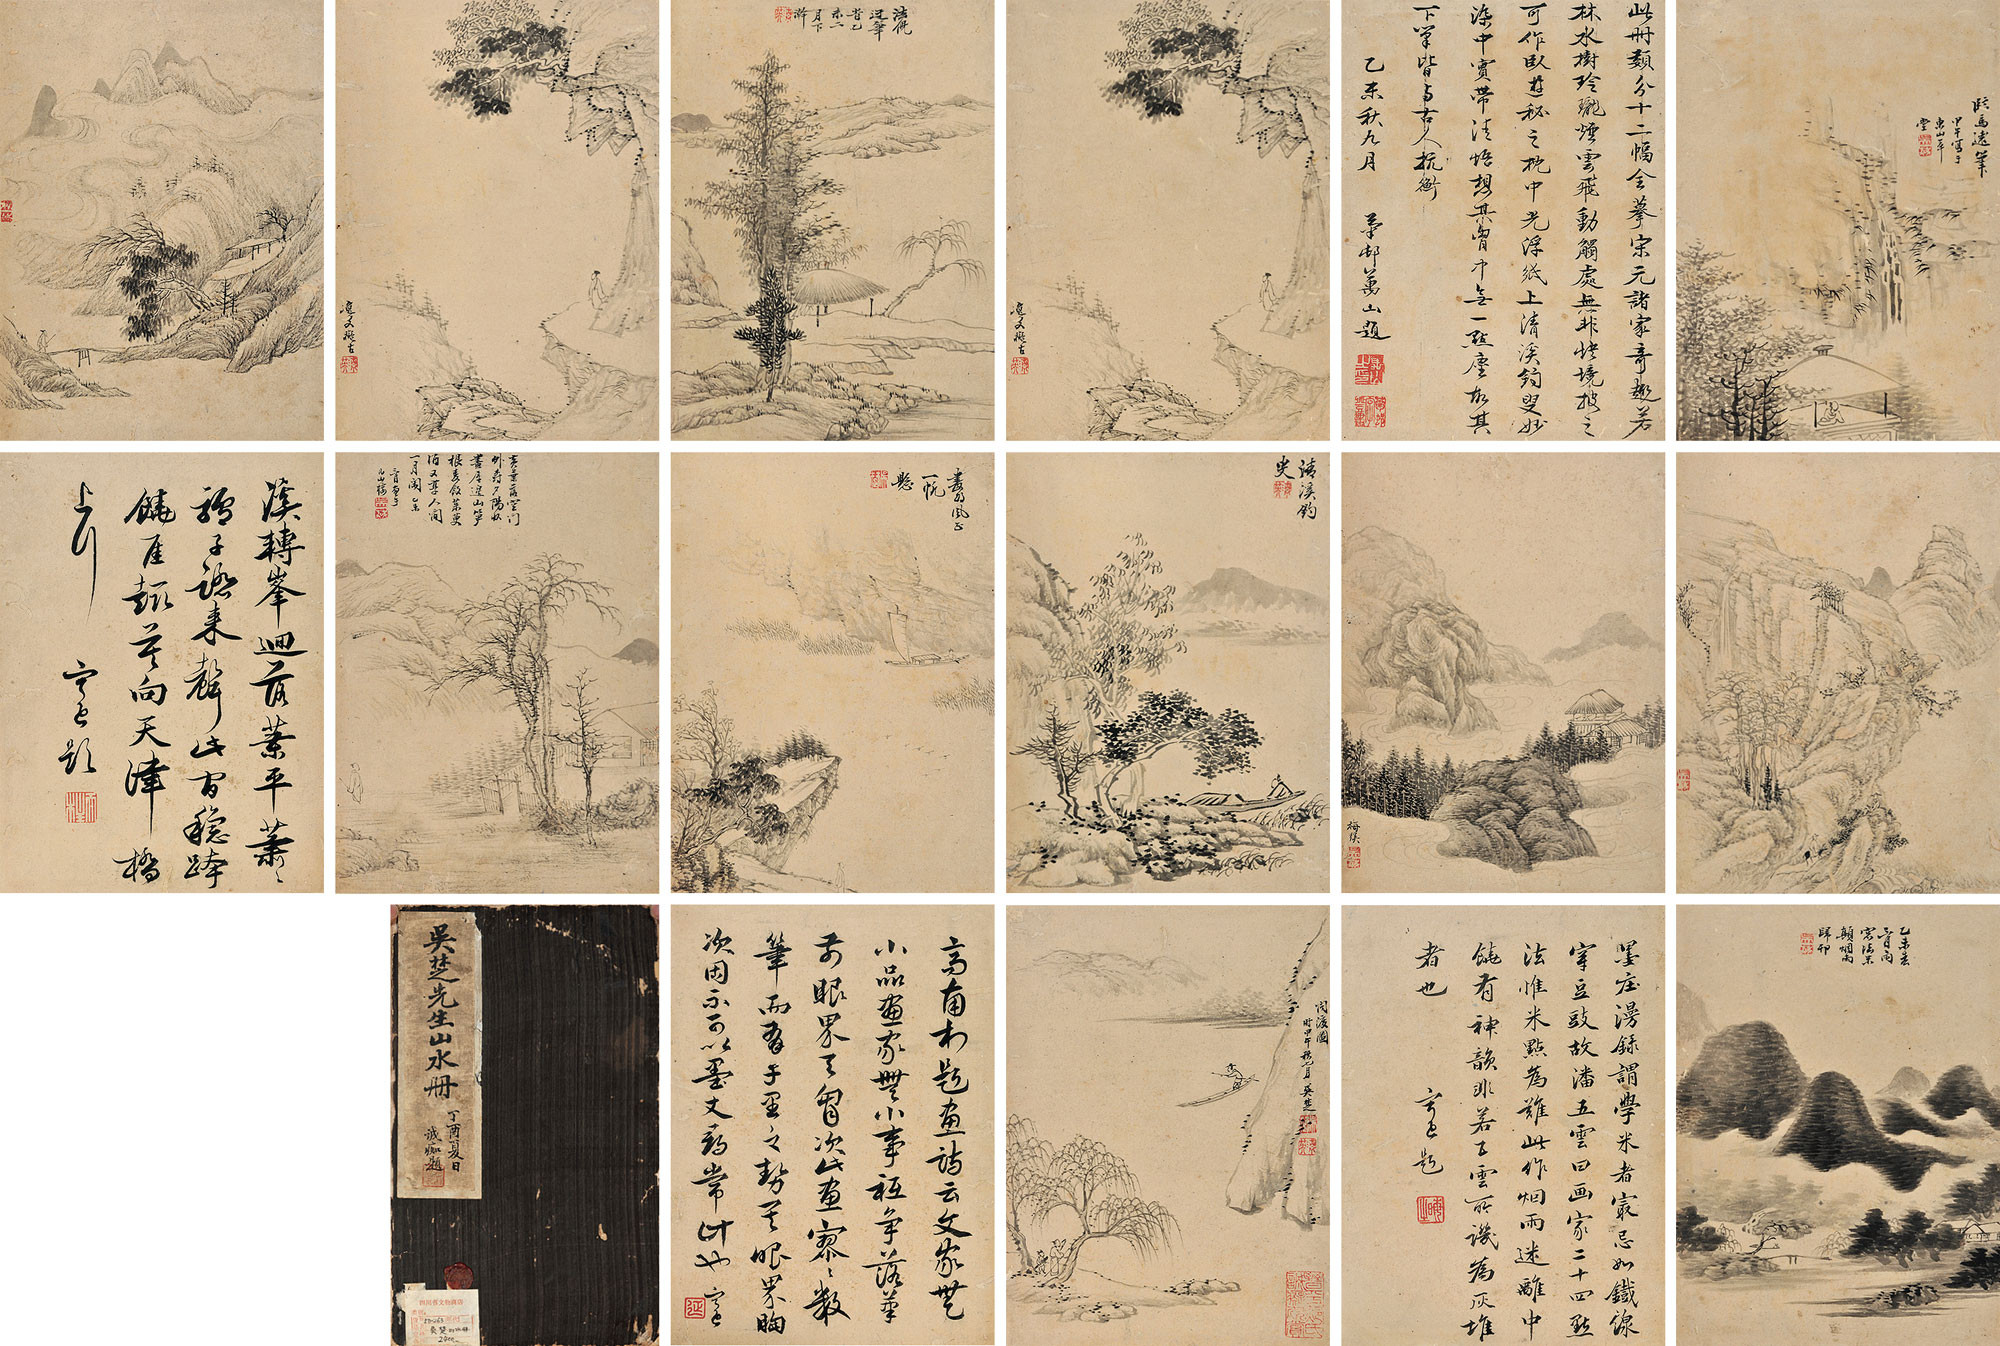 LANDSCAPE AND CALLIGRAPHY